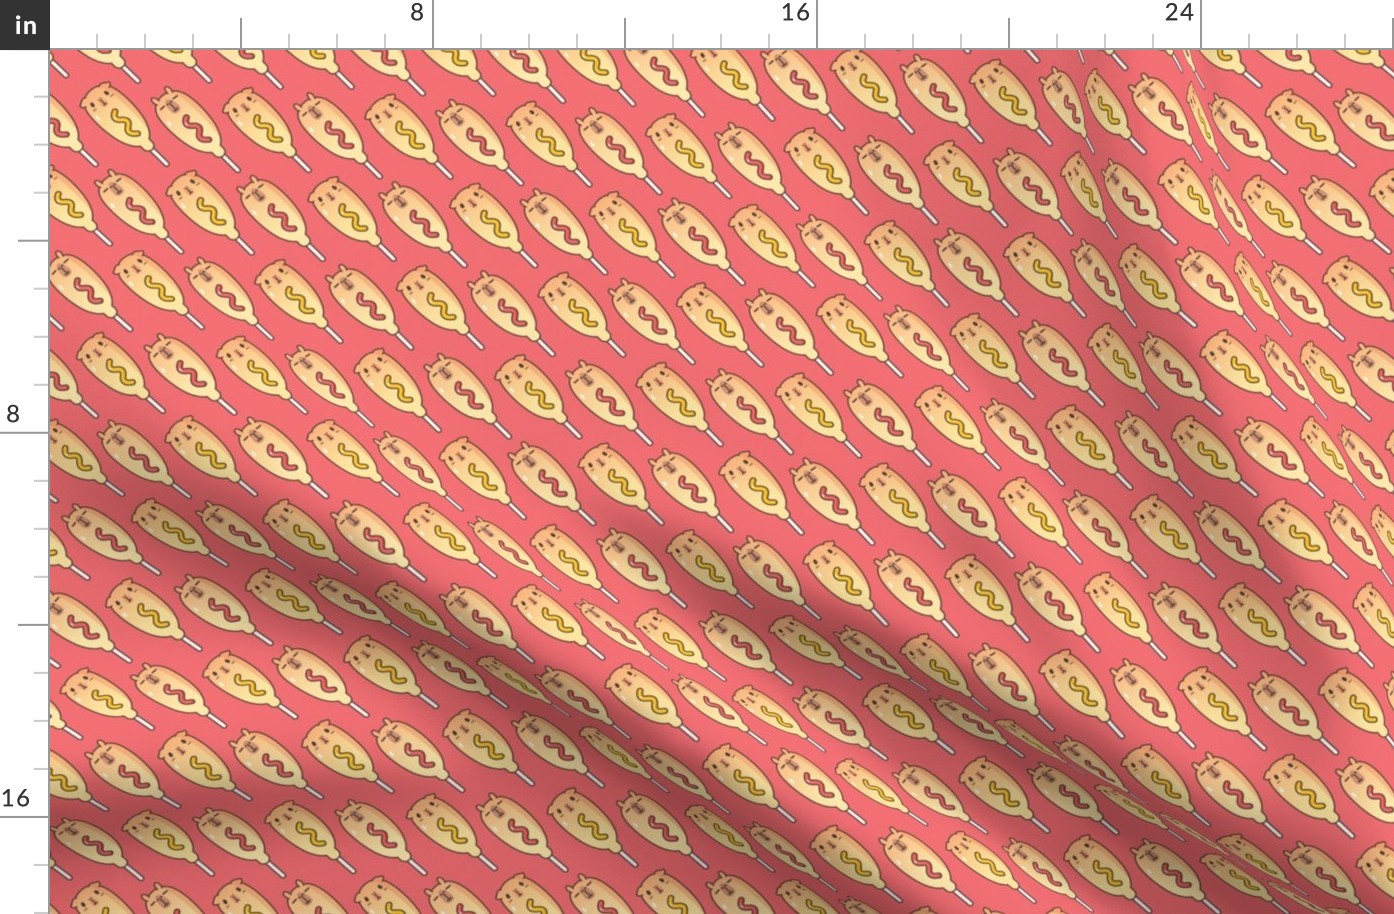 capybara and Guinea pig shape corn dogs pattern in red